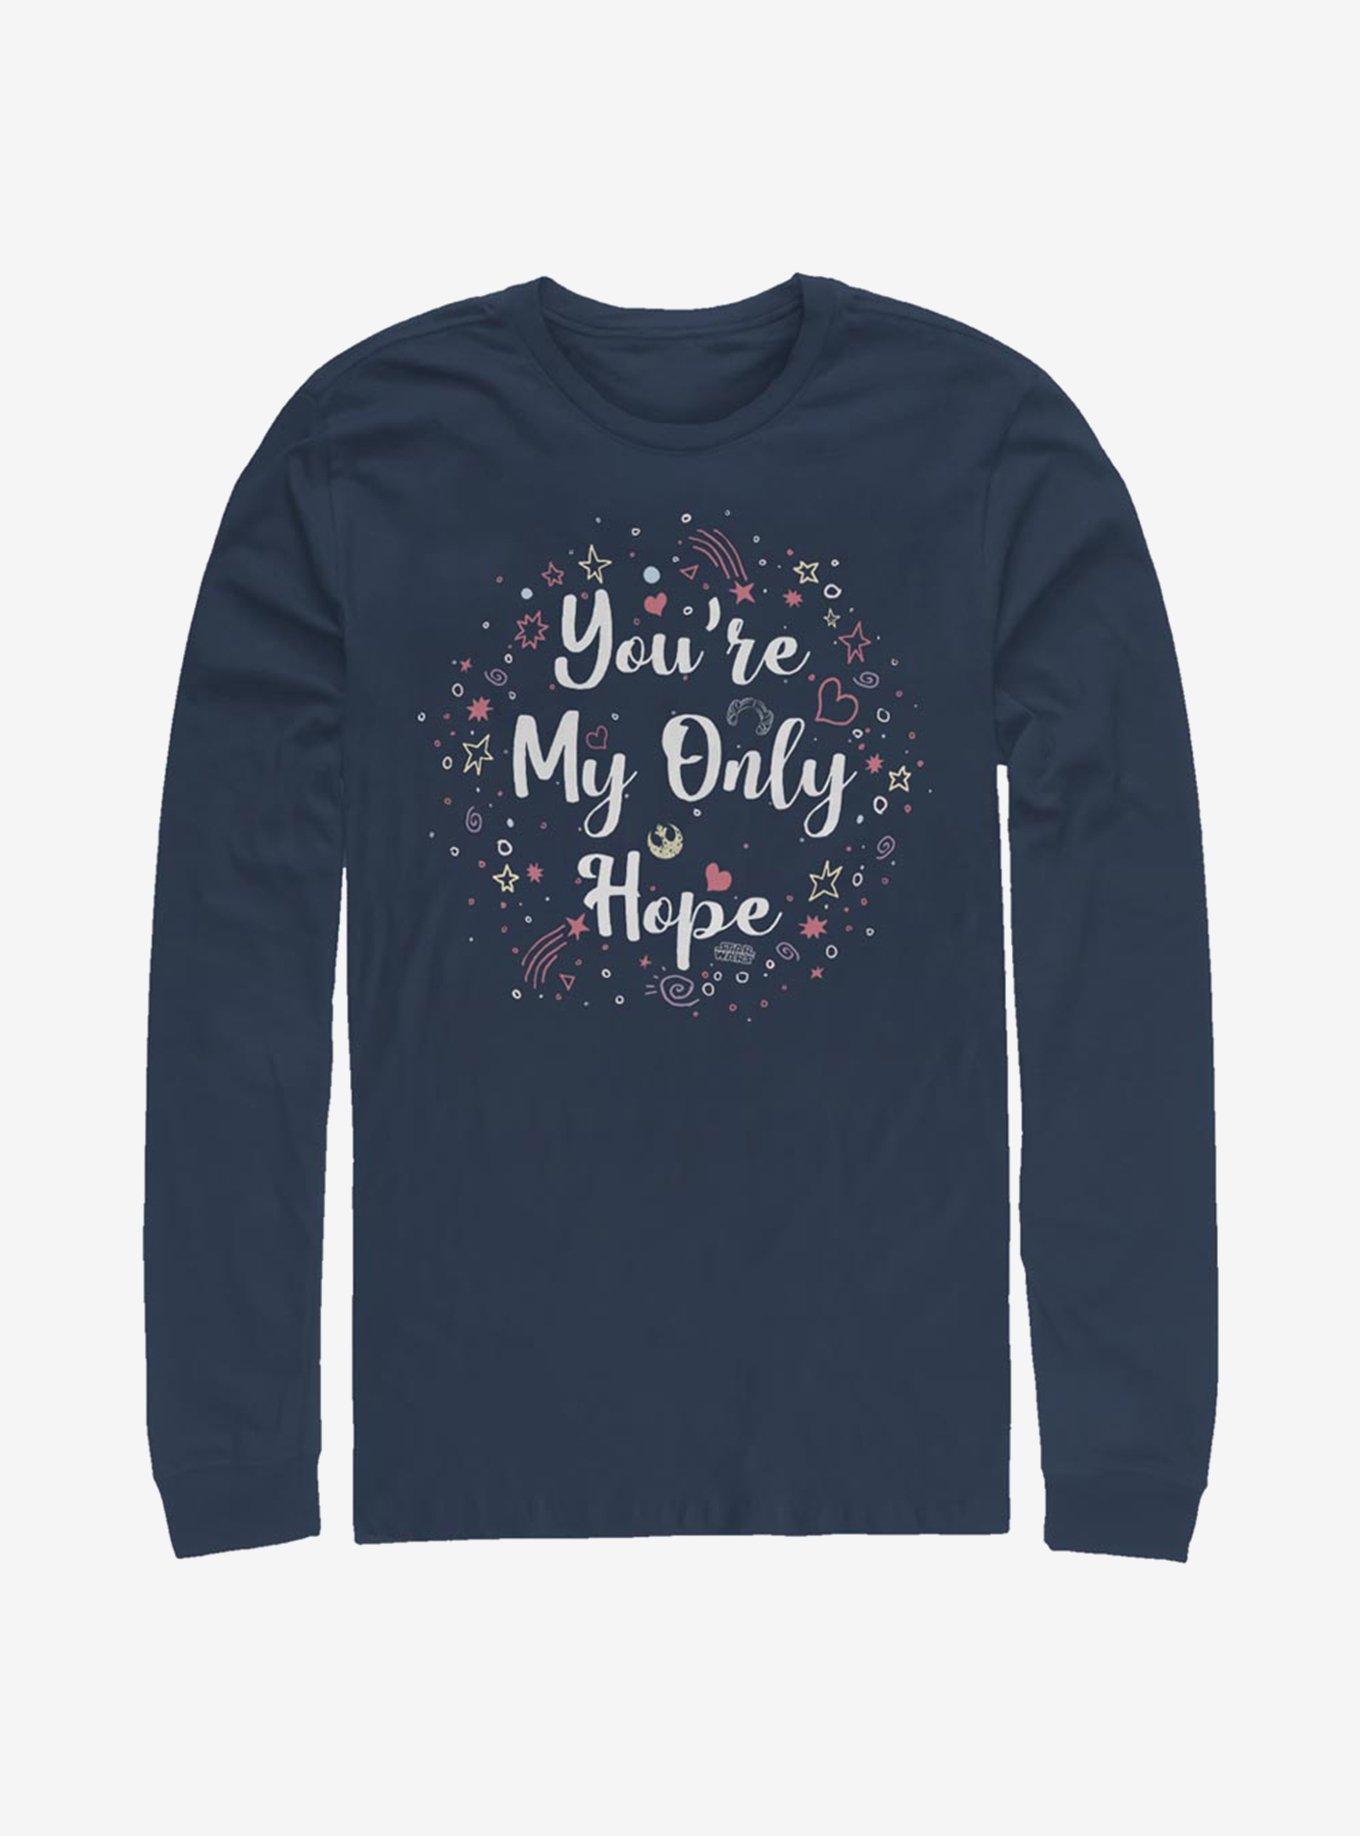 Star Wars Only Hope Long-Sleeve T-Shirt, NAVY, hi-res